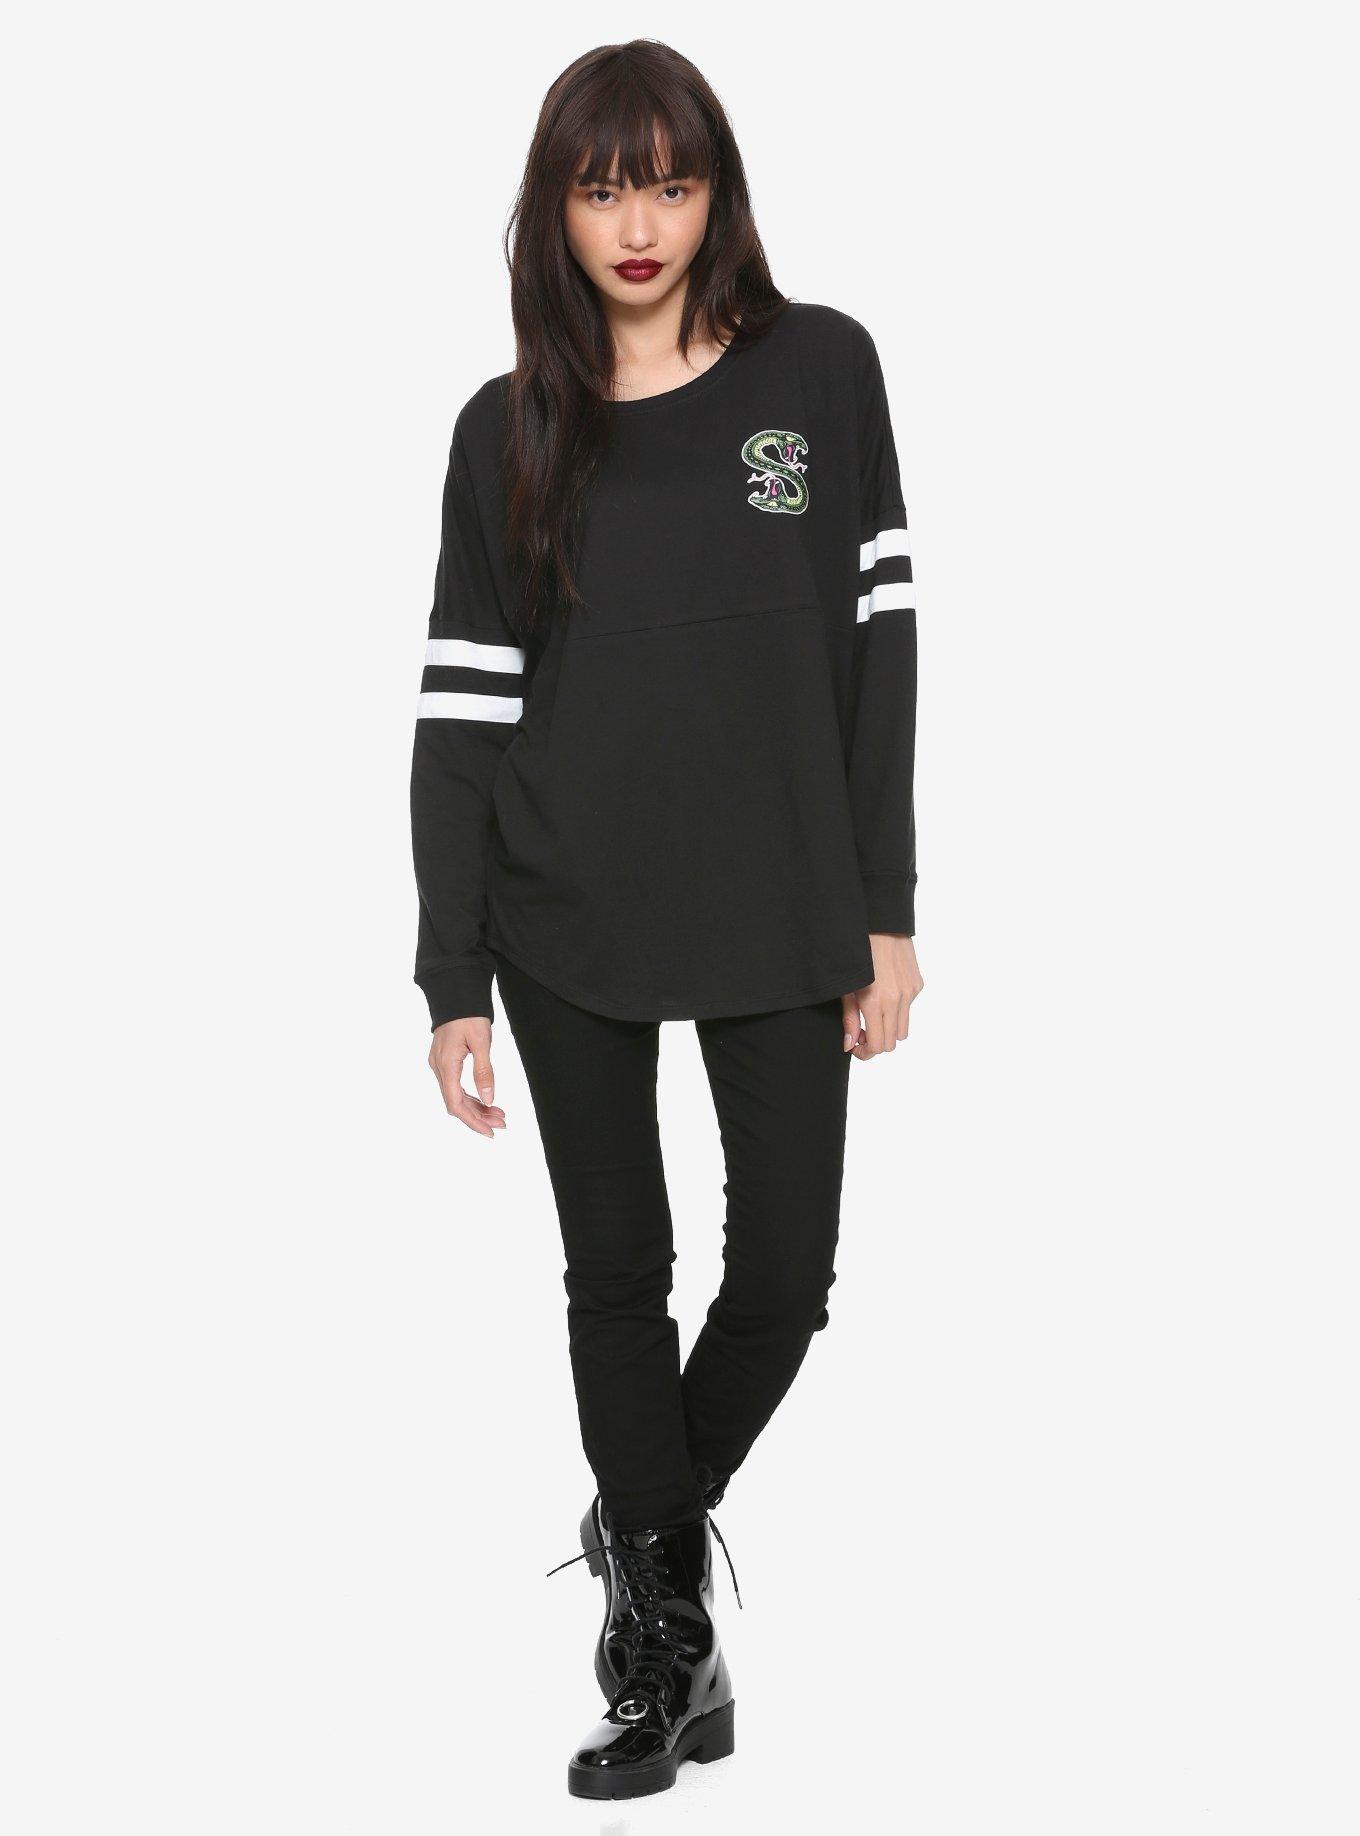 Riverdale Southside Serpents Girls Long-Sleeve Athletic Jersey Hot Topic Exclusive, , alternate